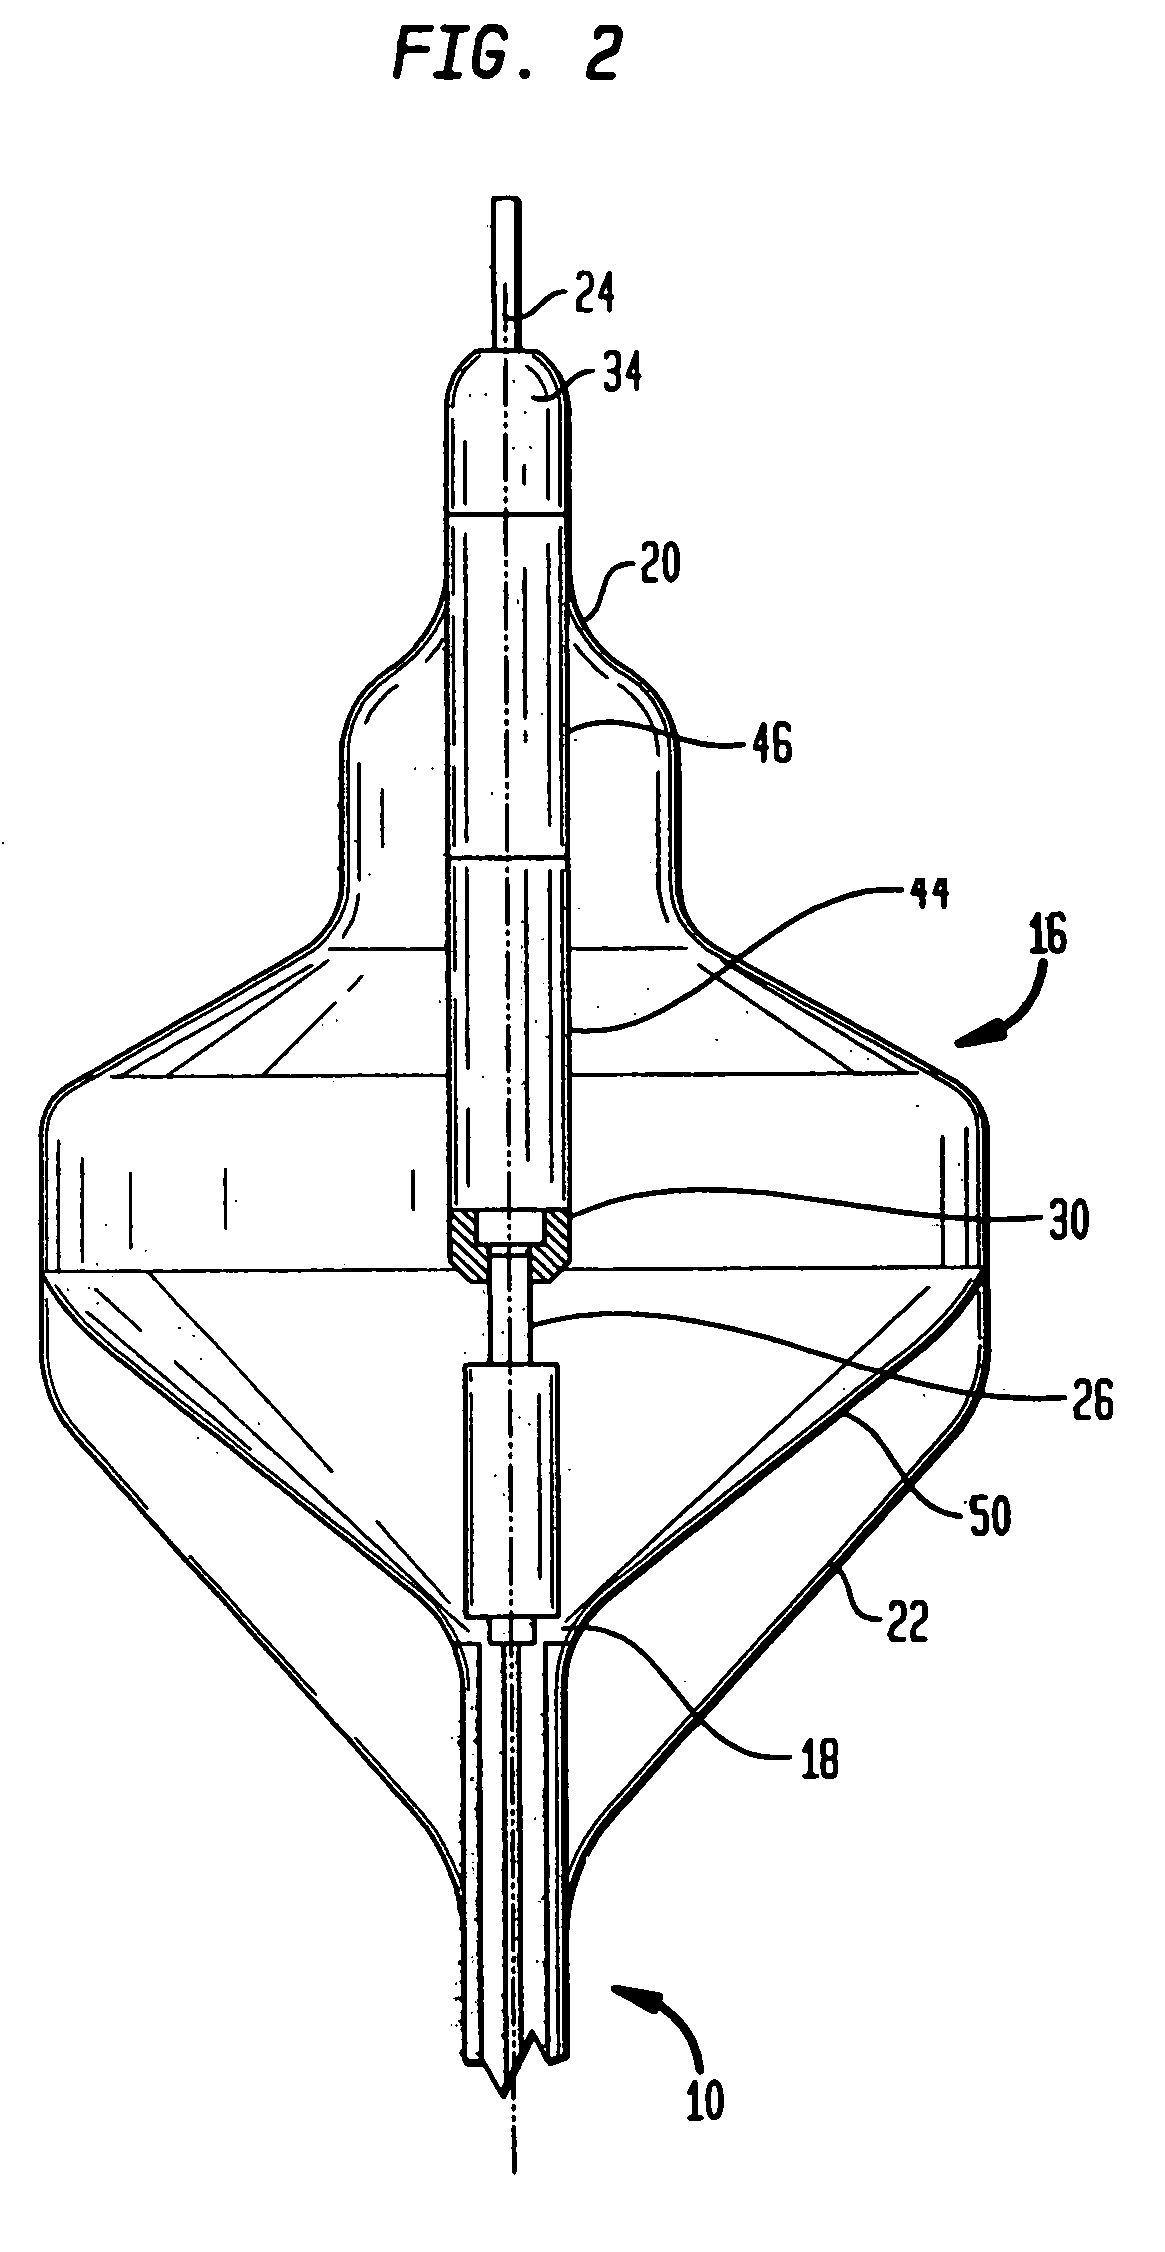 Balloon alignment and collapsing system